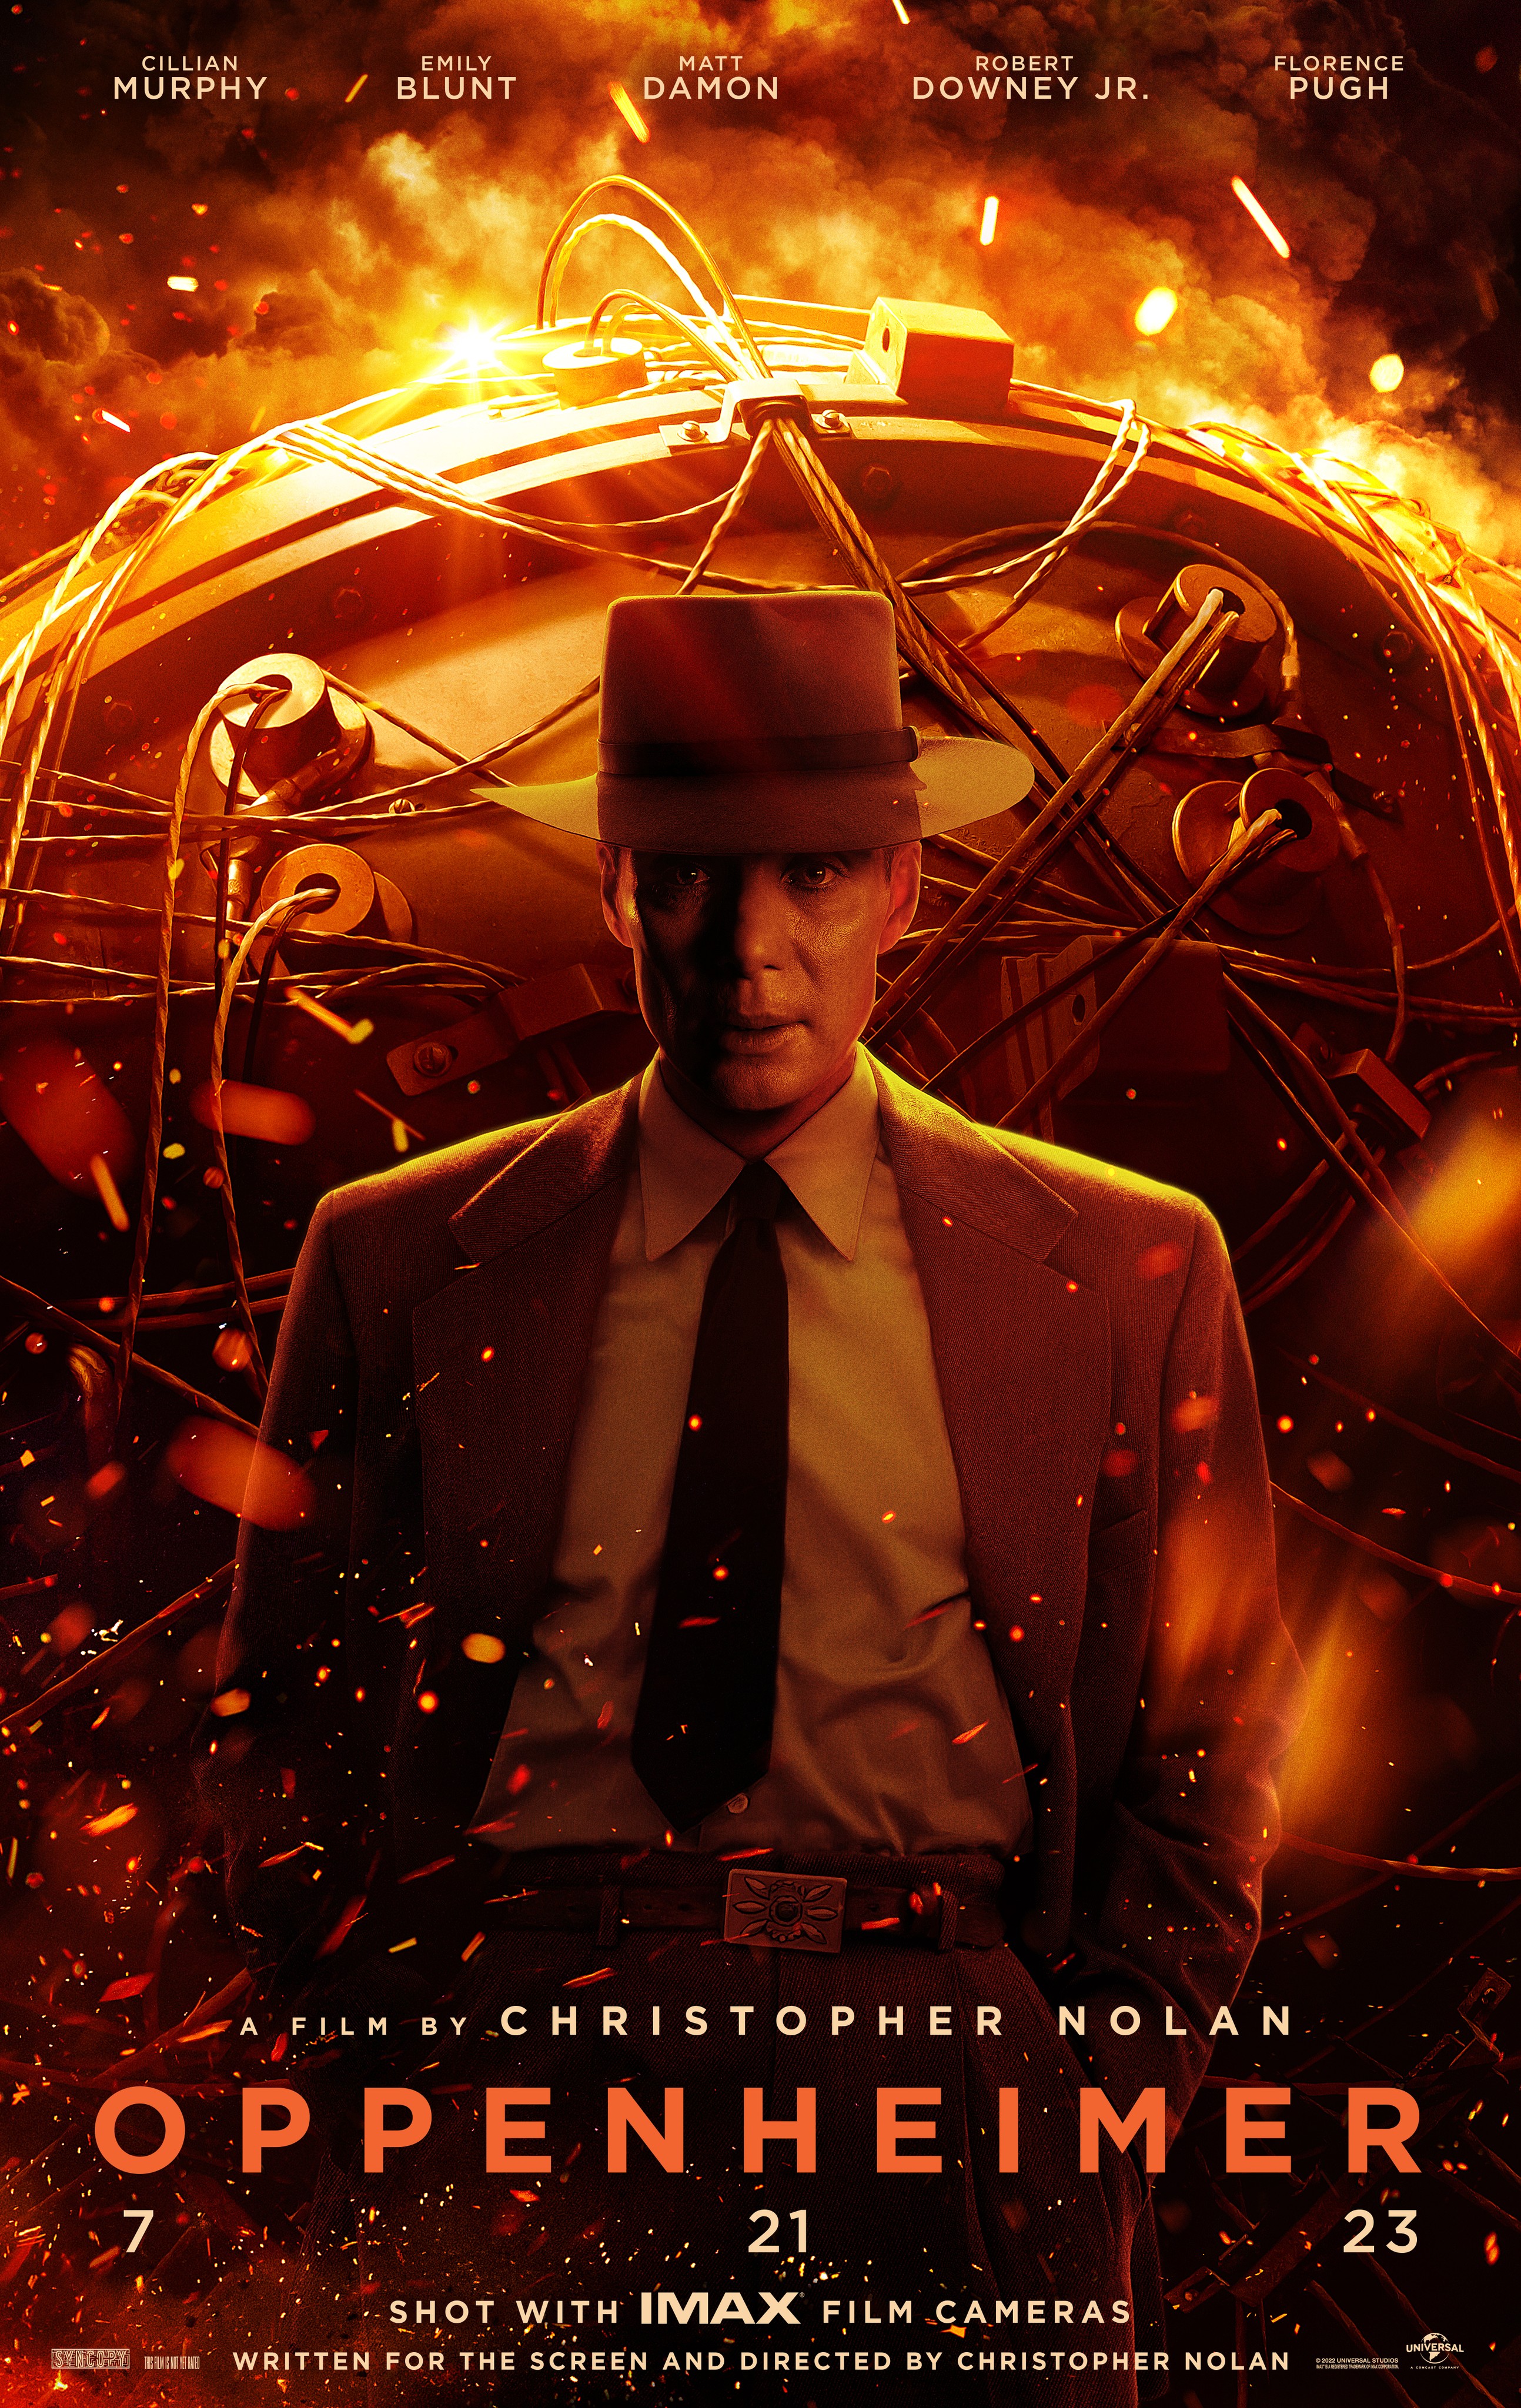 Poster of Oppenheimer with Cillian Murphy as Oppenheimer in front of an explosion.